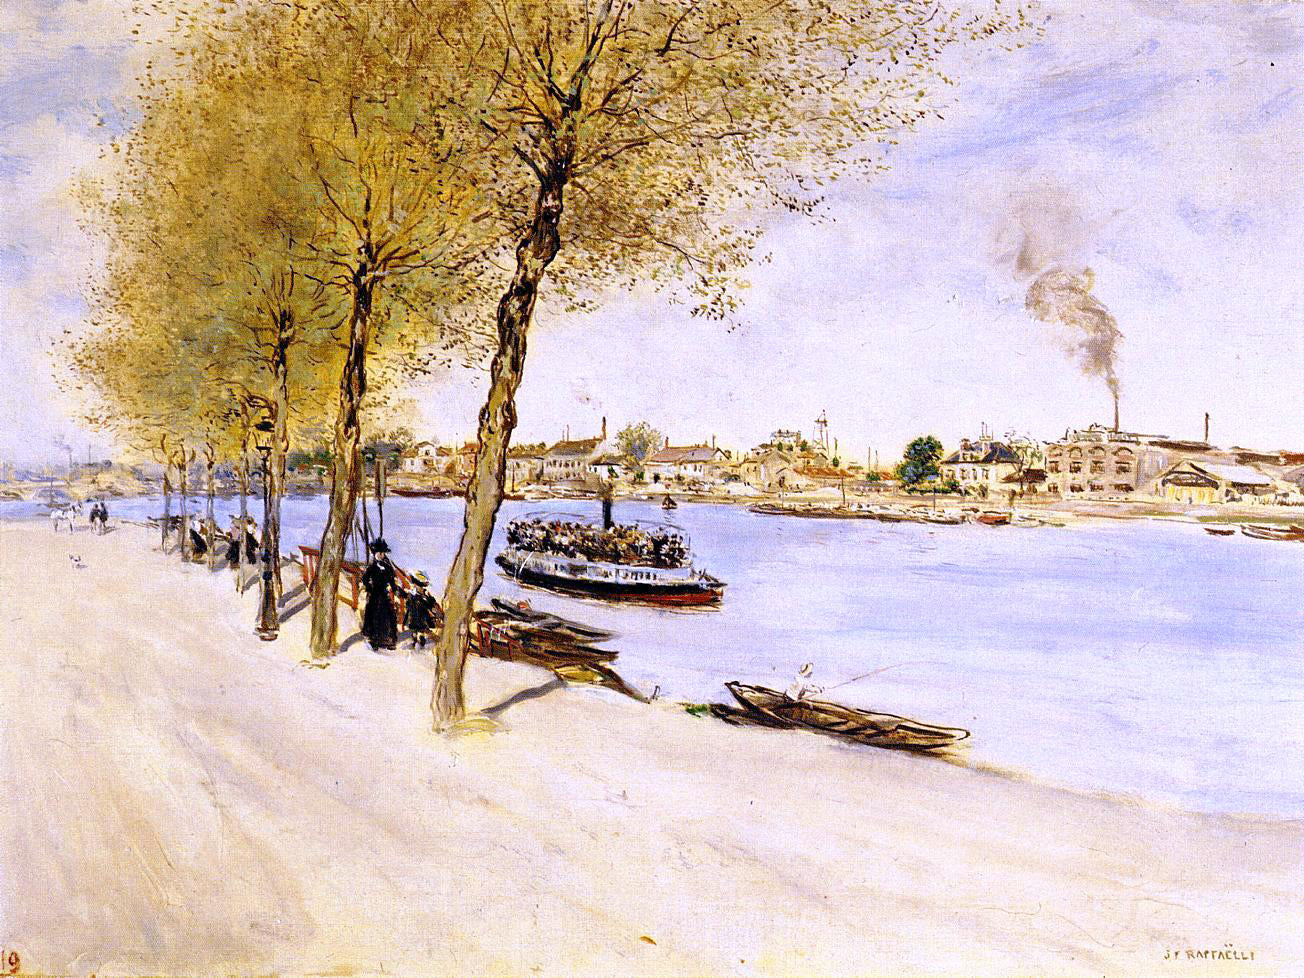  Jean-Francois Raffaelli By the Water in Springtime - Hand Painted Oil Painting